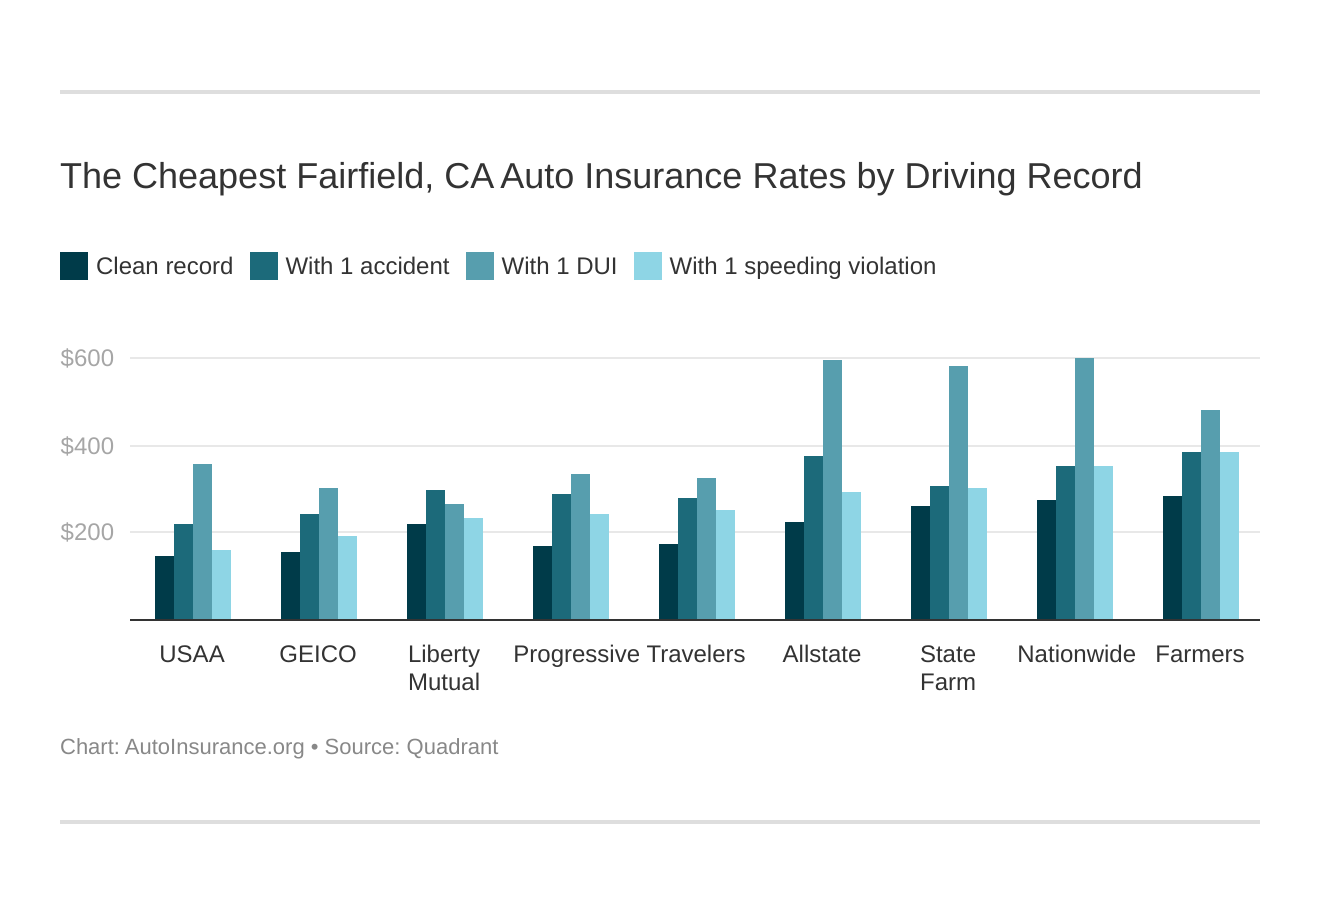 The Cheapest Fairfield, CA Auto Insurance Rates by Driving Record